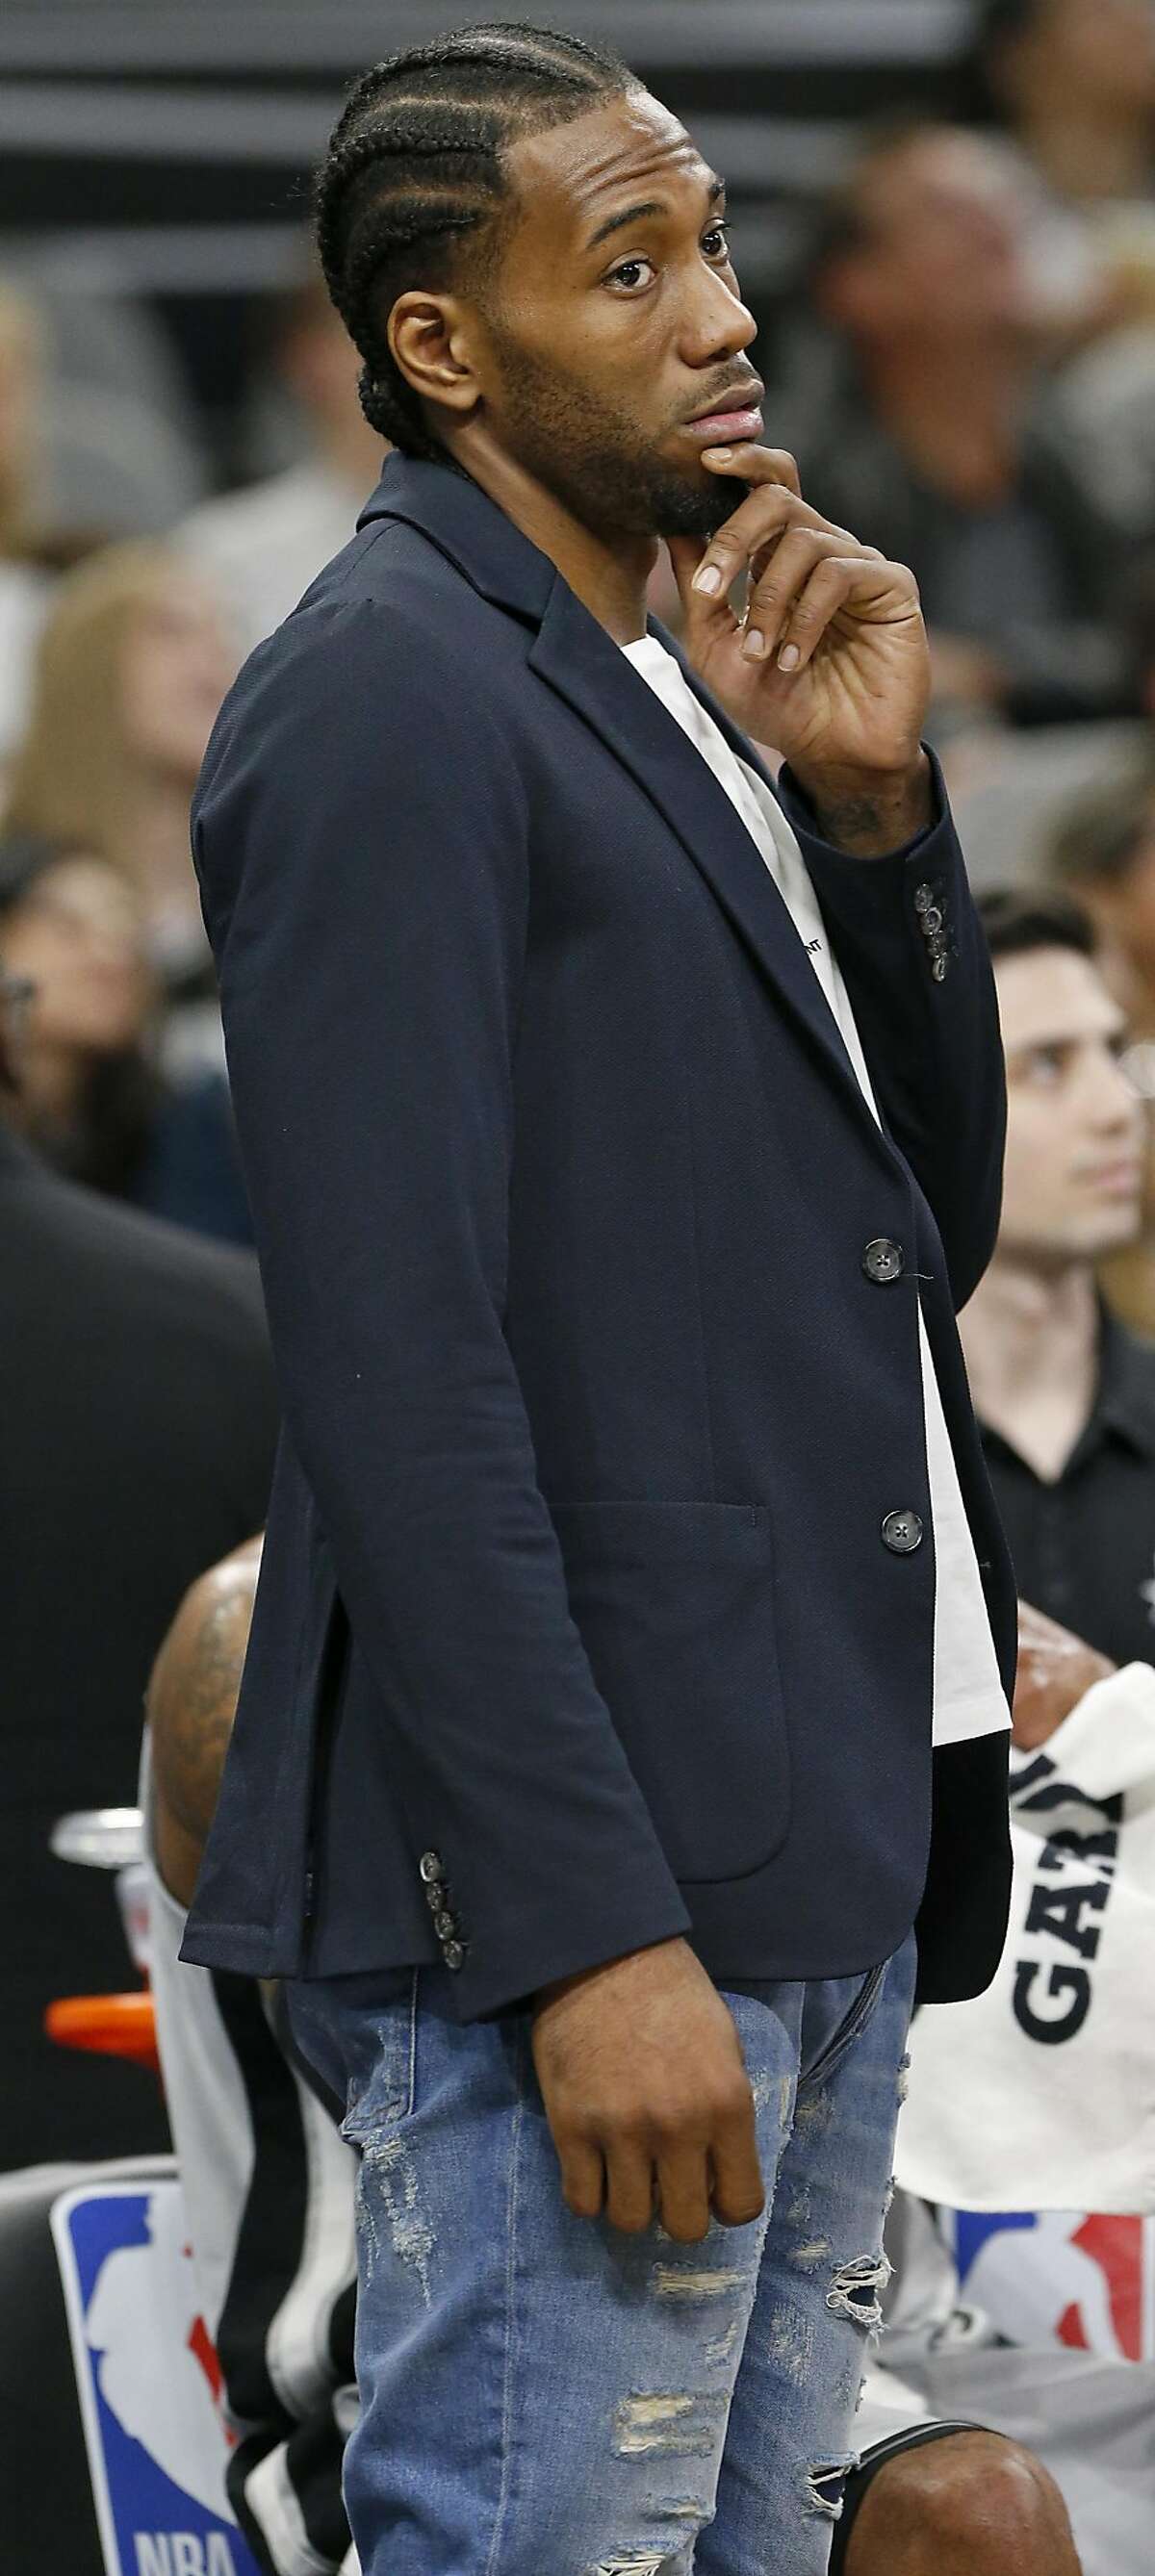 San Antonio Spurs' Kawhi Leonard stands near the bench during a timeout in first half action against the Indiana Pacers Sunday Jan. 21, 2018 at the AT&T Center.